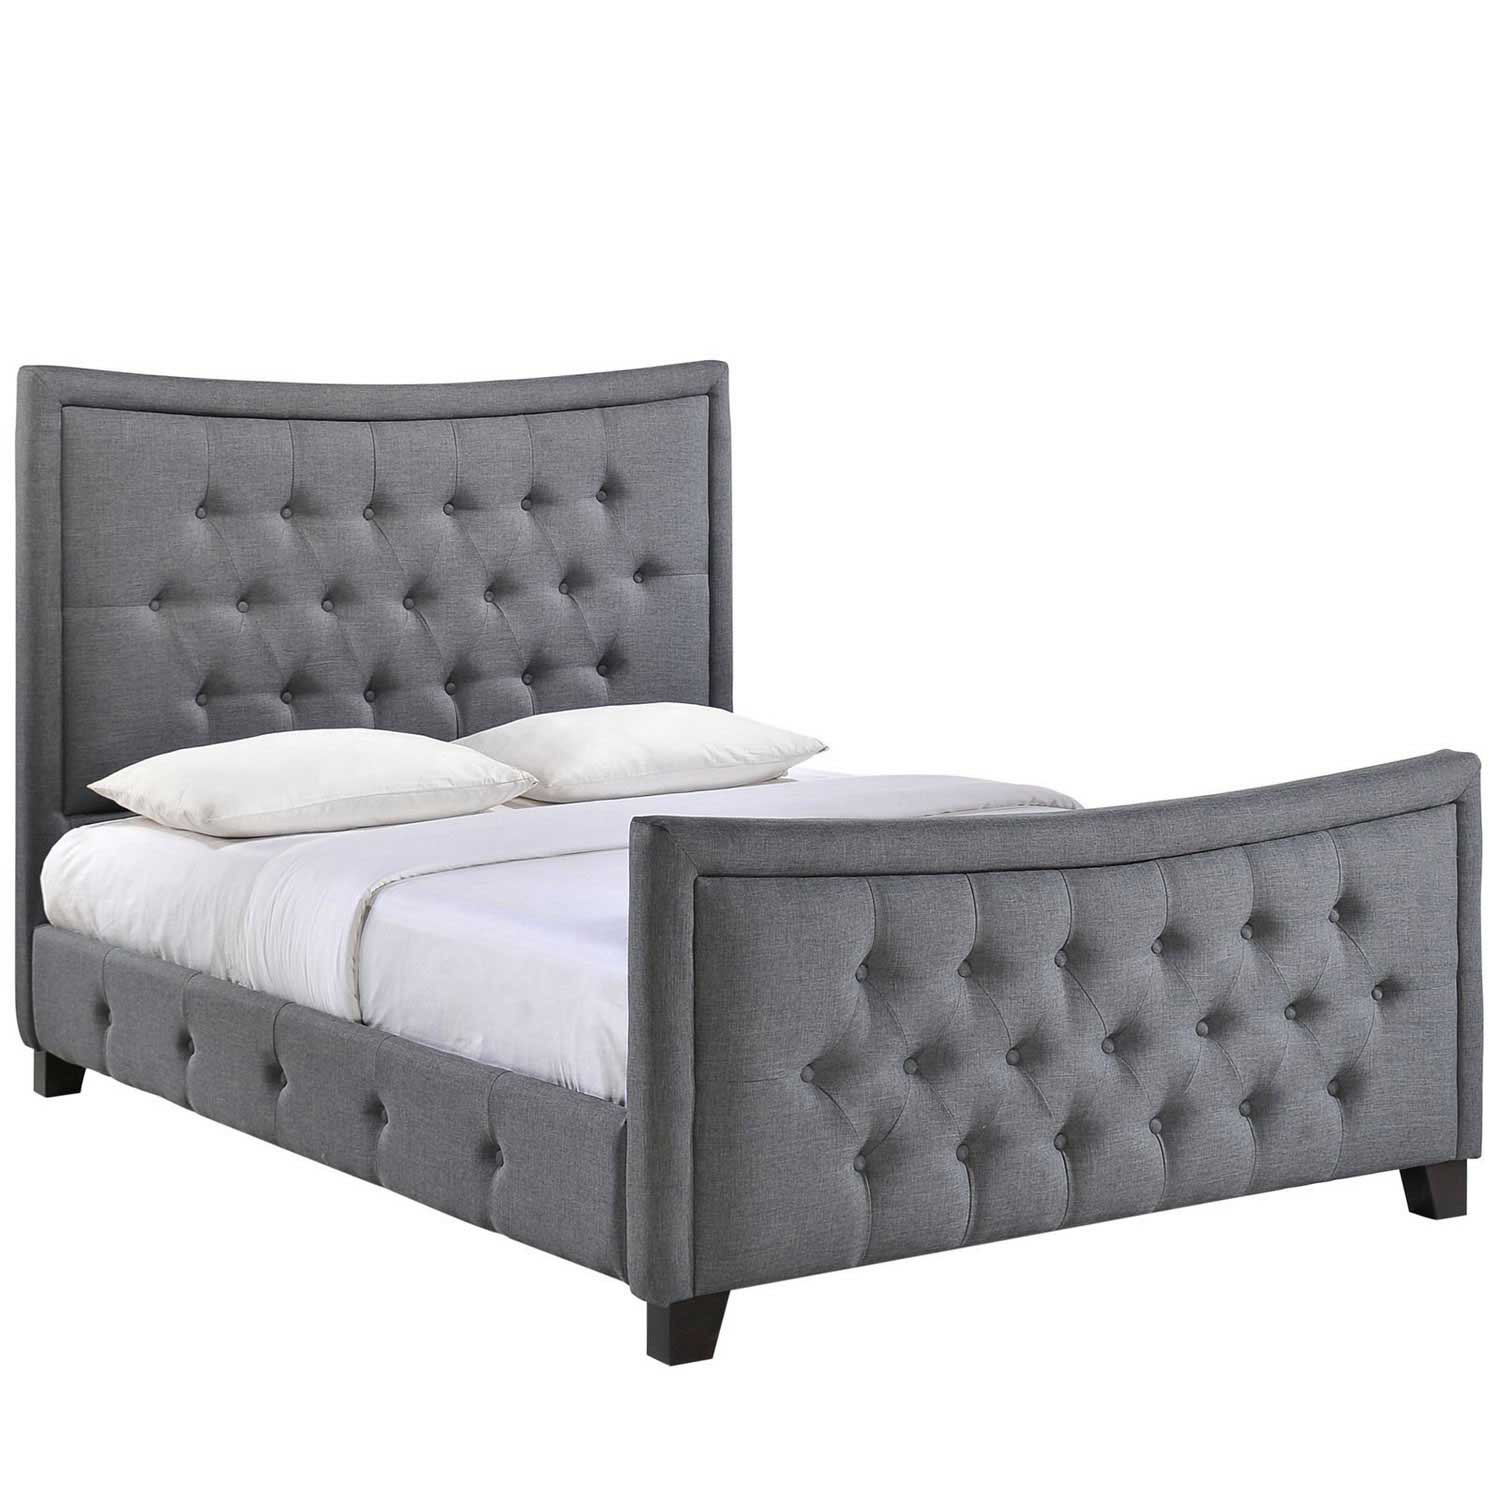 Modway Claire Queen Bed - Smoke